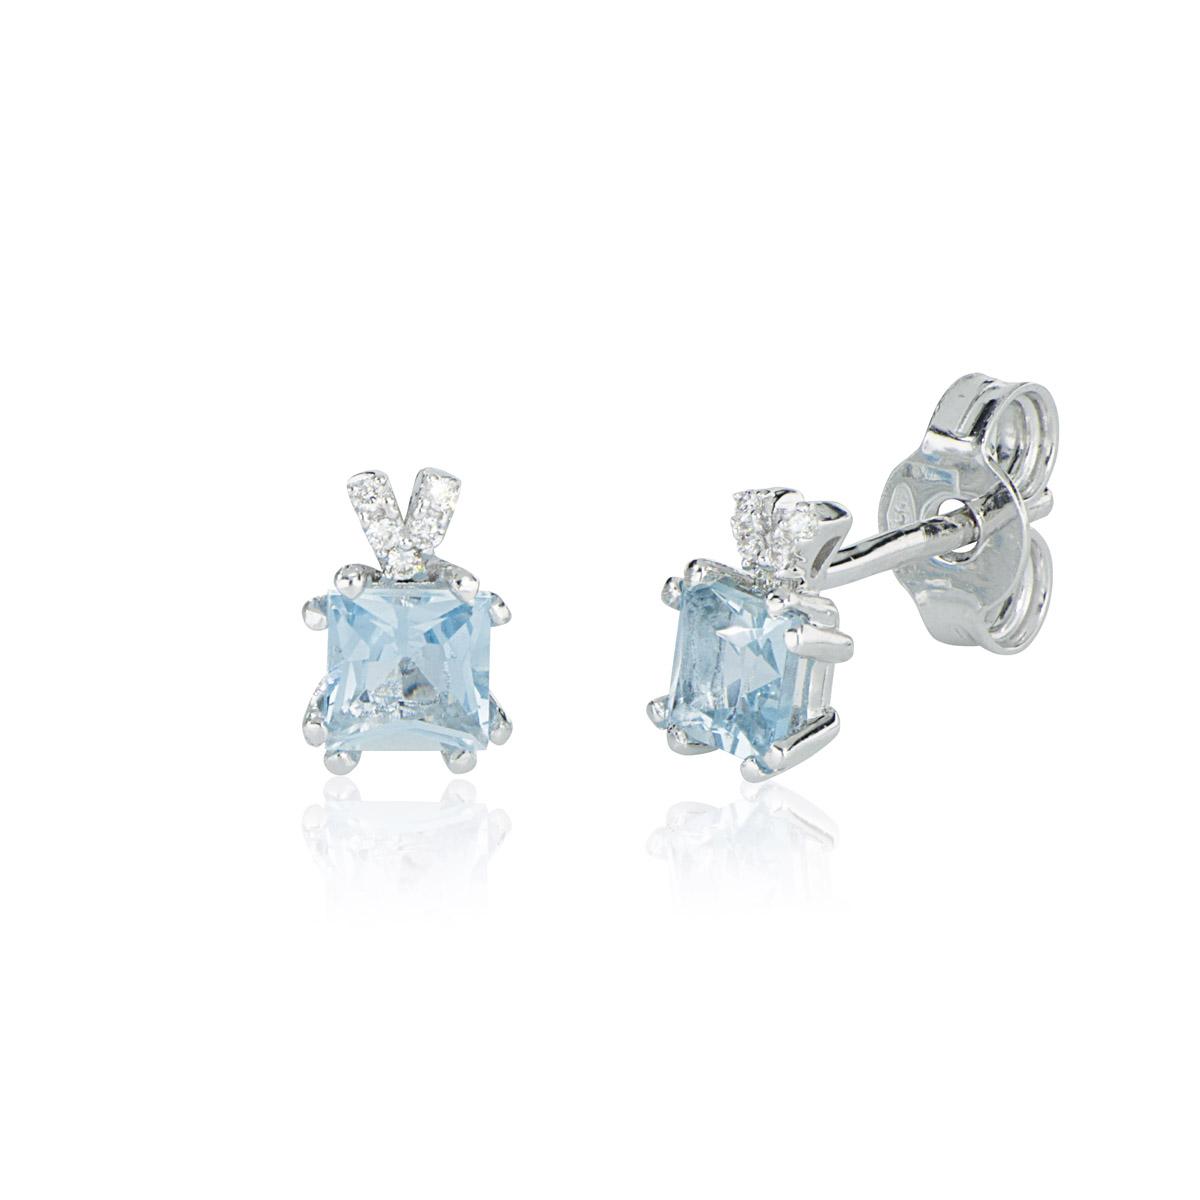 18 kt white gold earrings, with aquamarine and diamonds - OD467/AC-LB